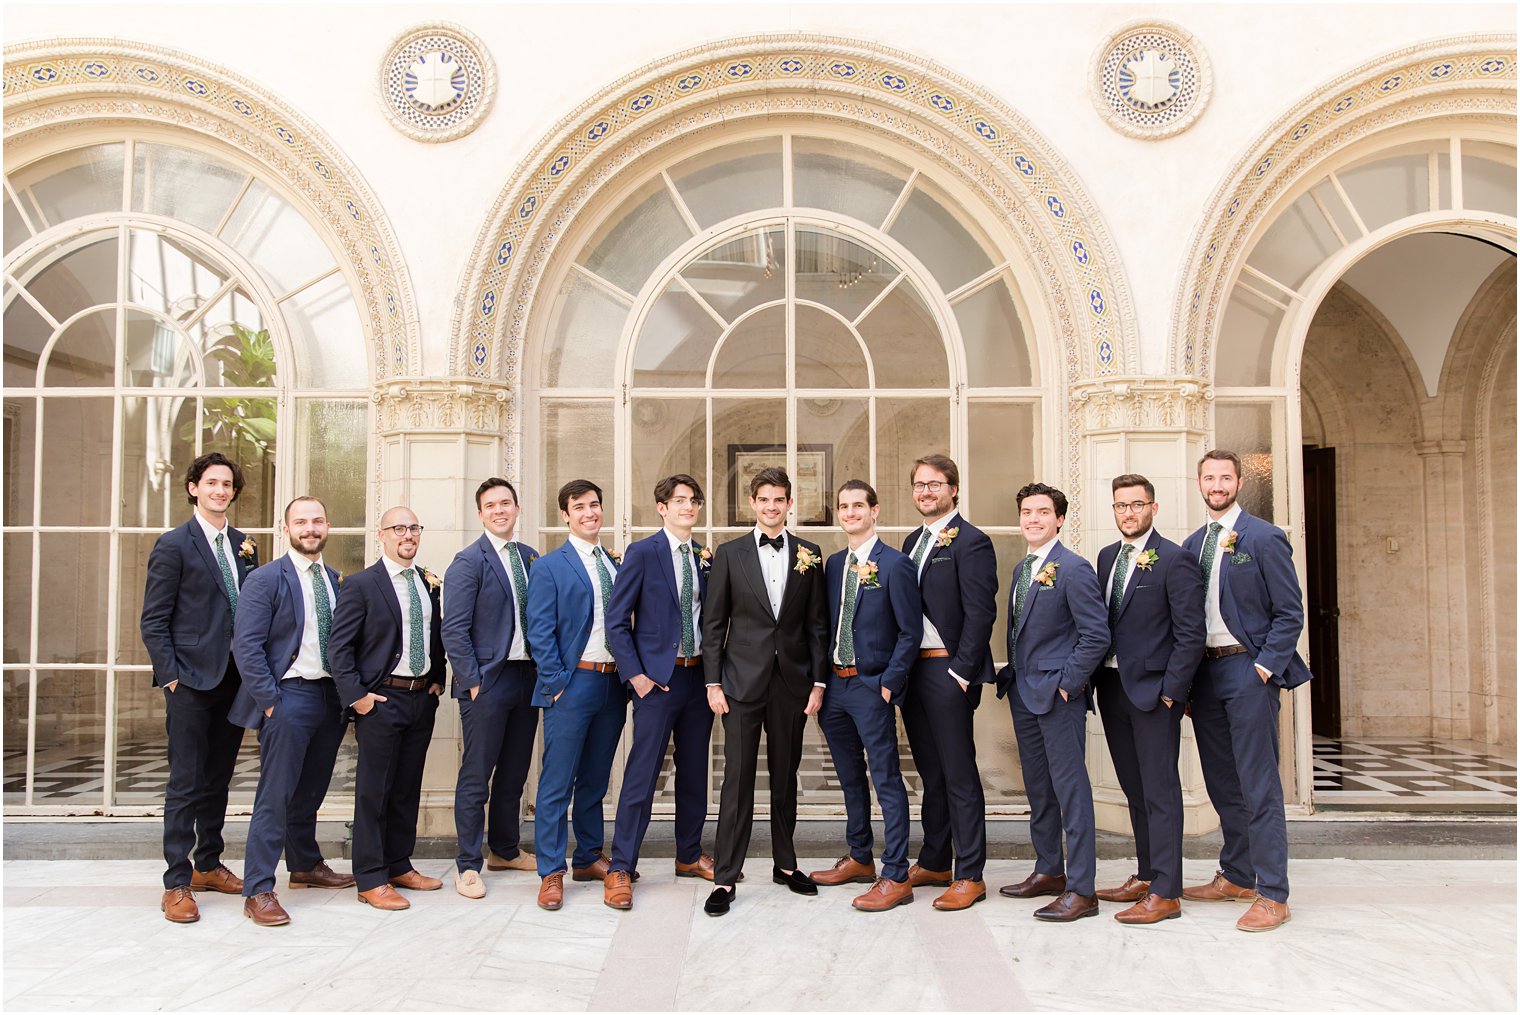 groom and groomsmen pose in mismatched navy suits